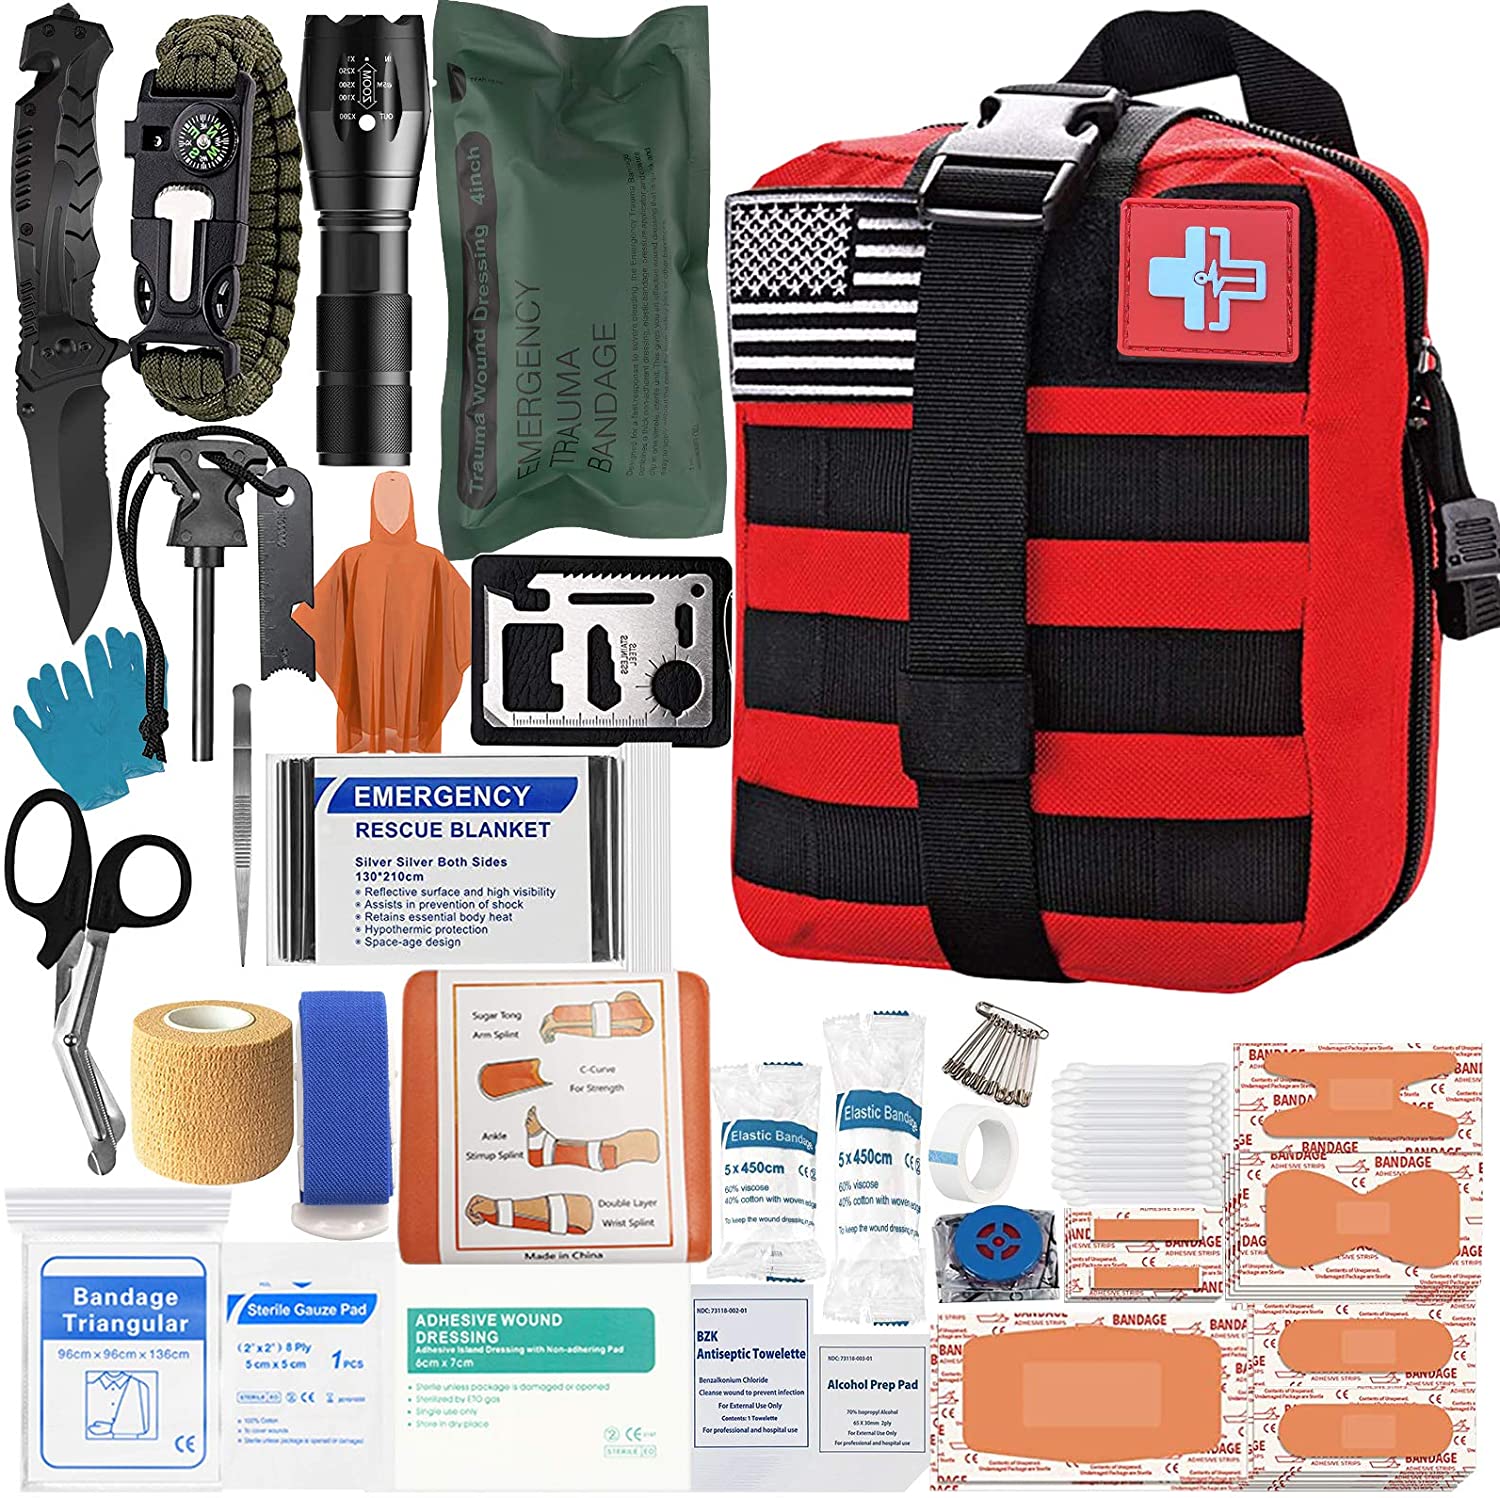 Trauma First Aid Kit with Survival Gear Outdoor Tactical Gear Set Military Grade Molle System for Camper Travel Hunting Hiking and Adventures